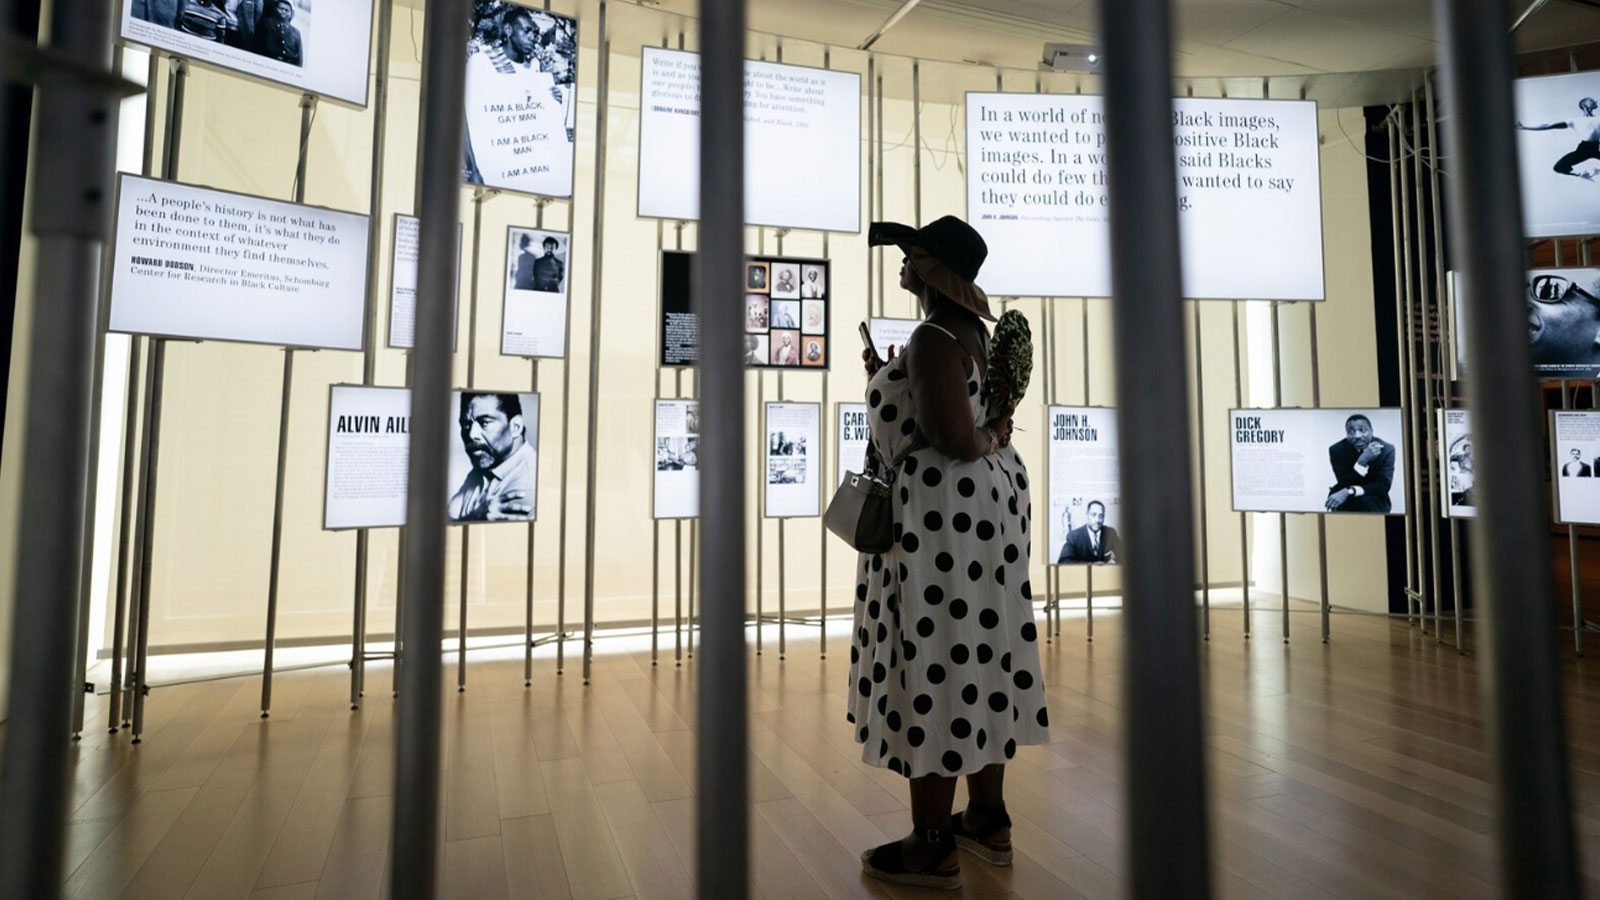 At ‘ground zero’ for slavery, a new museum helps rewrite history